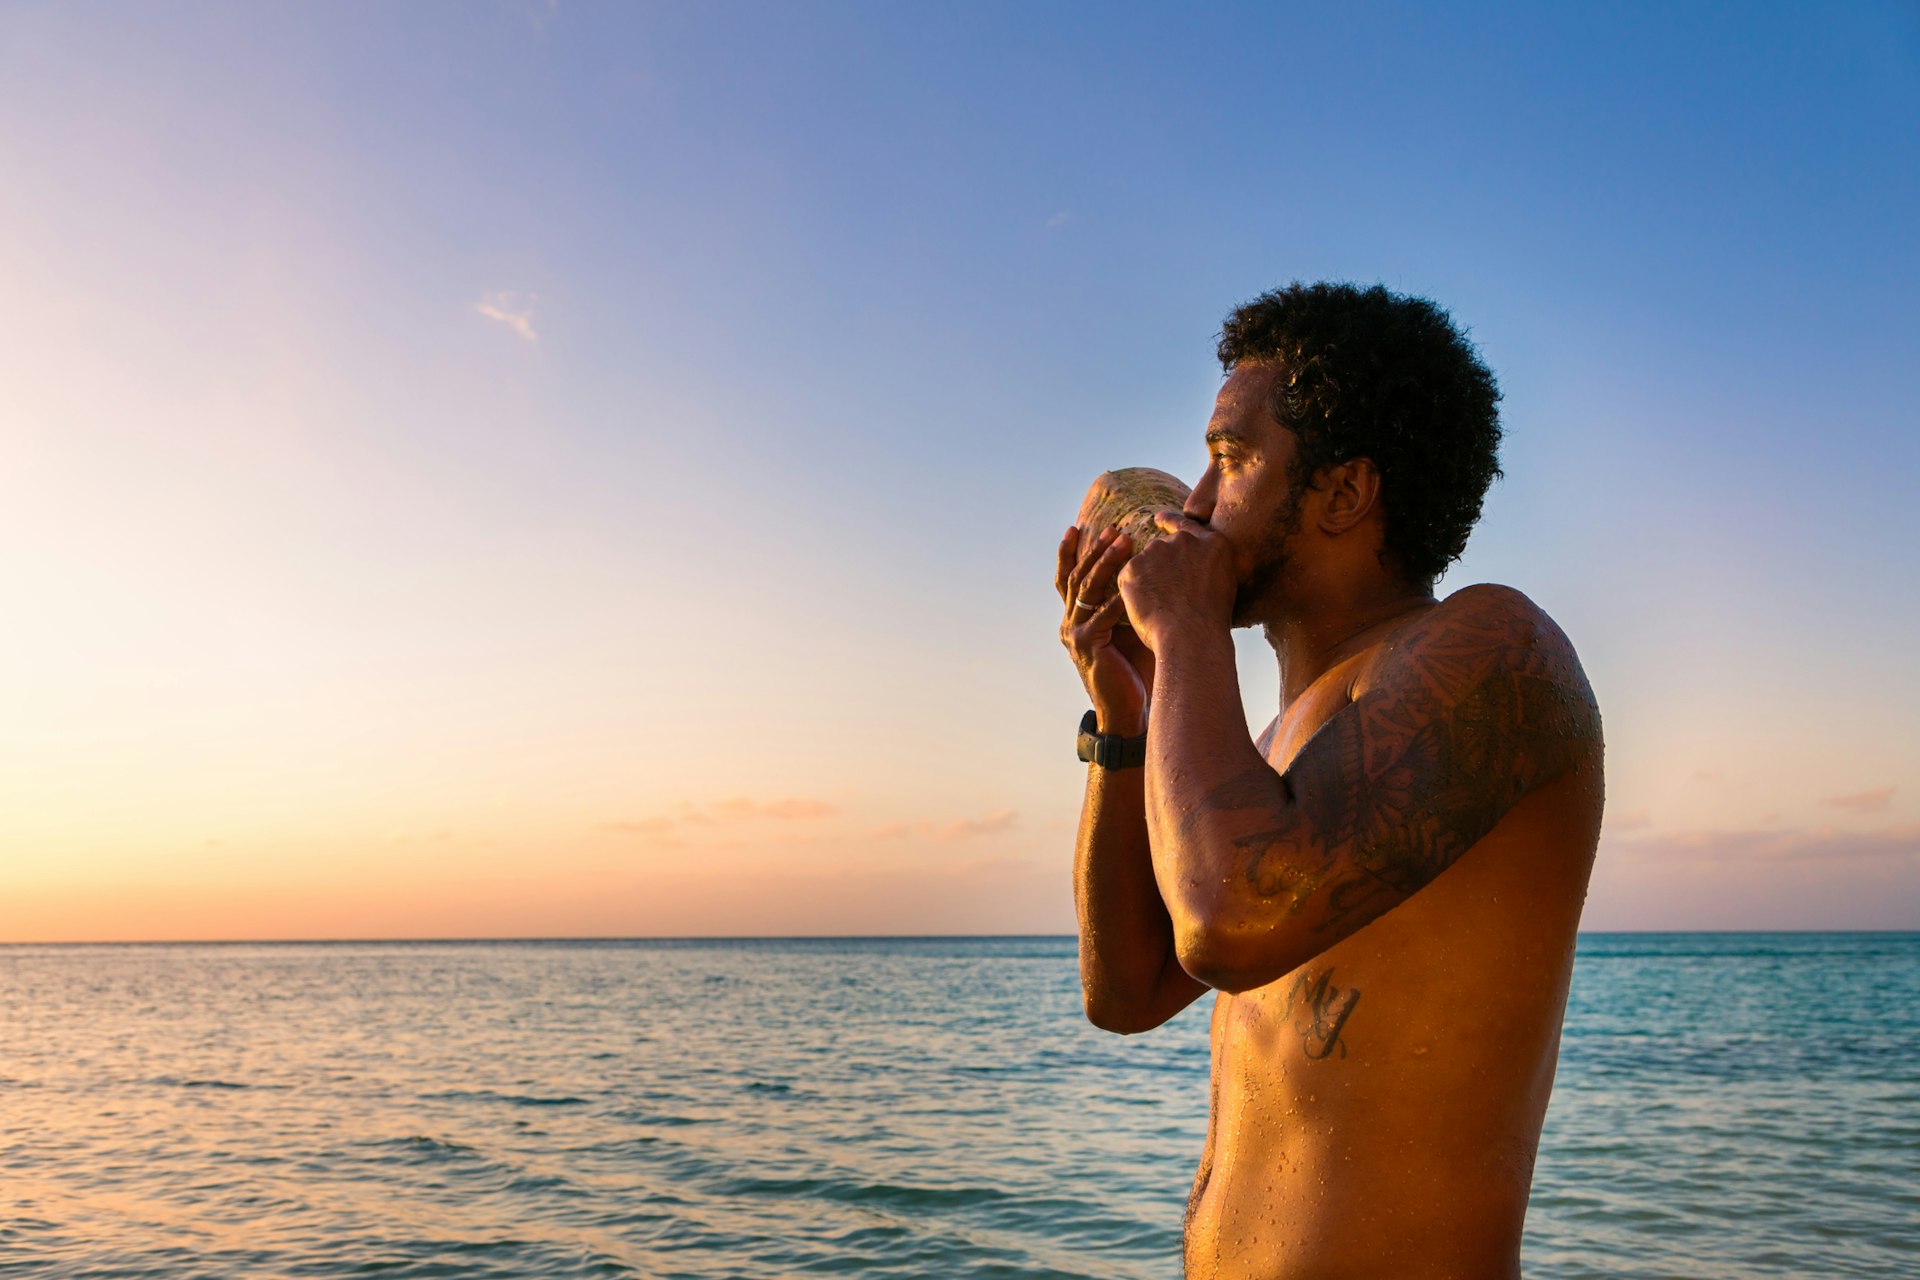 Local fijian man blowing traditional conch shell at sunset, Fiji, Pacific Islands